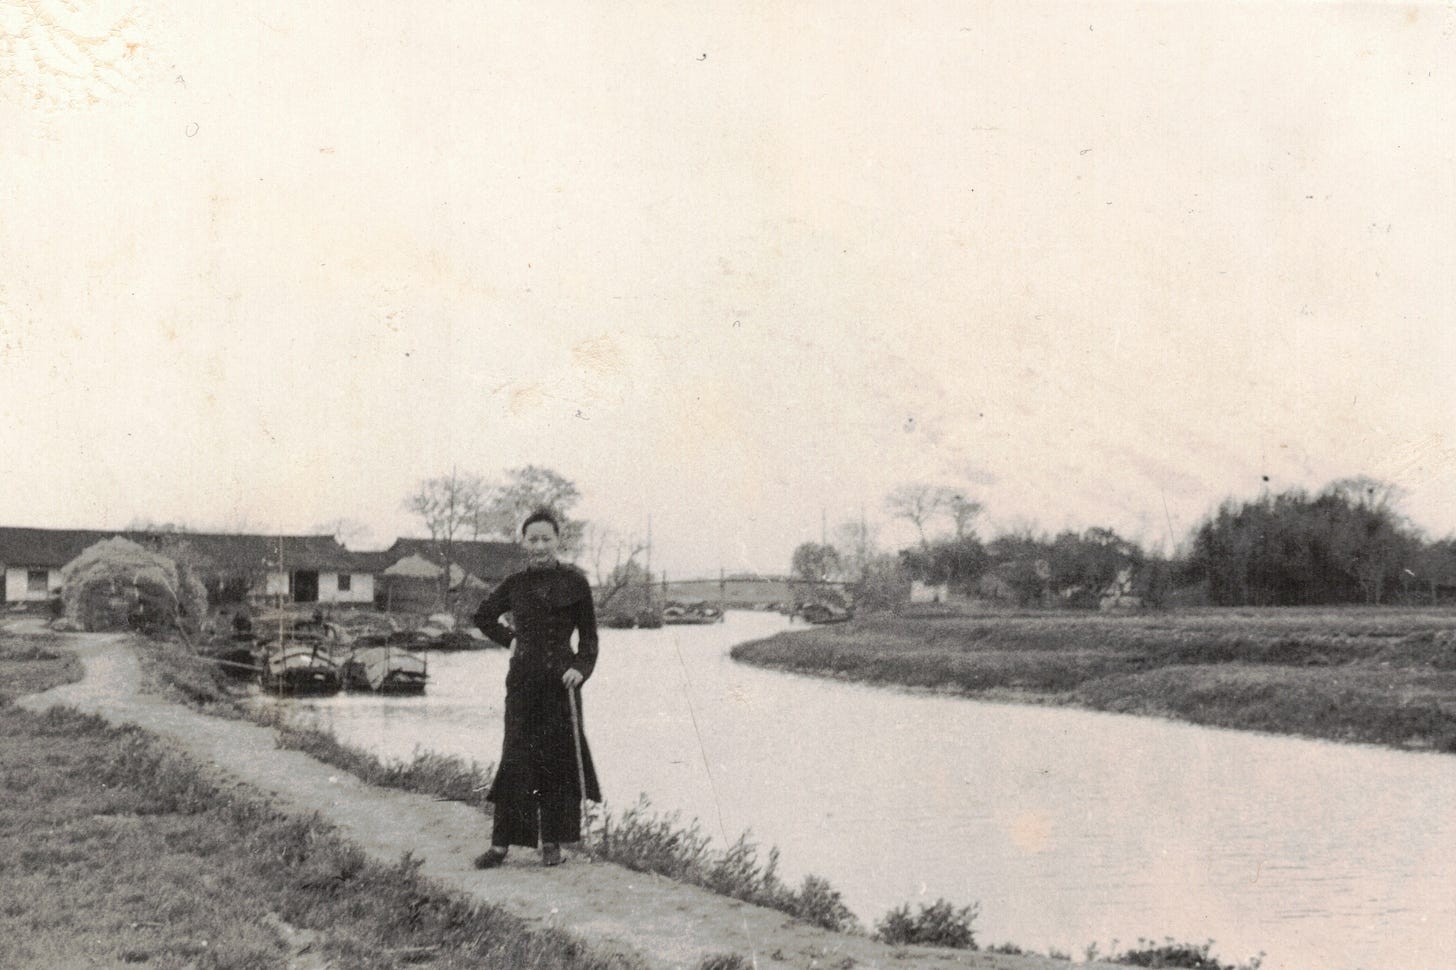 Anna May Wong in all black stands on a dirt path near a canal with farmhouses in the background, rural China